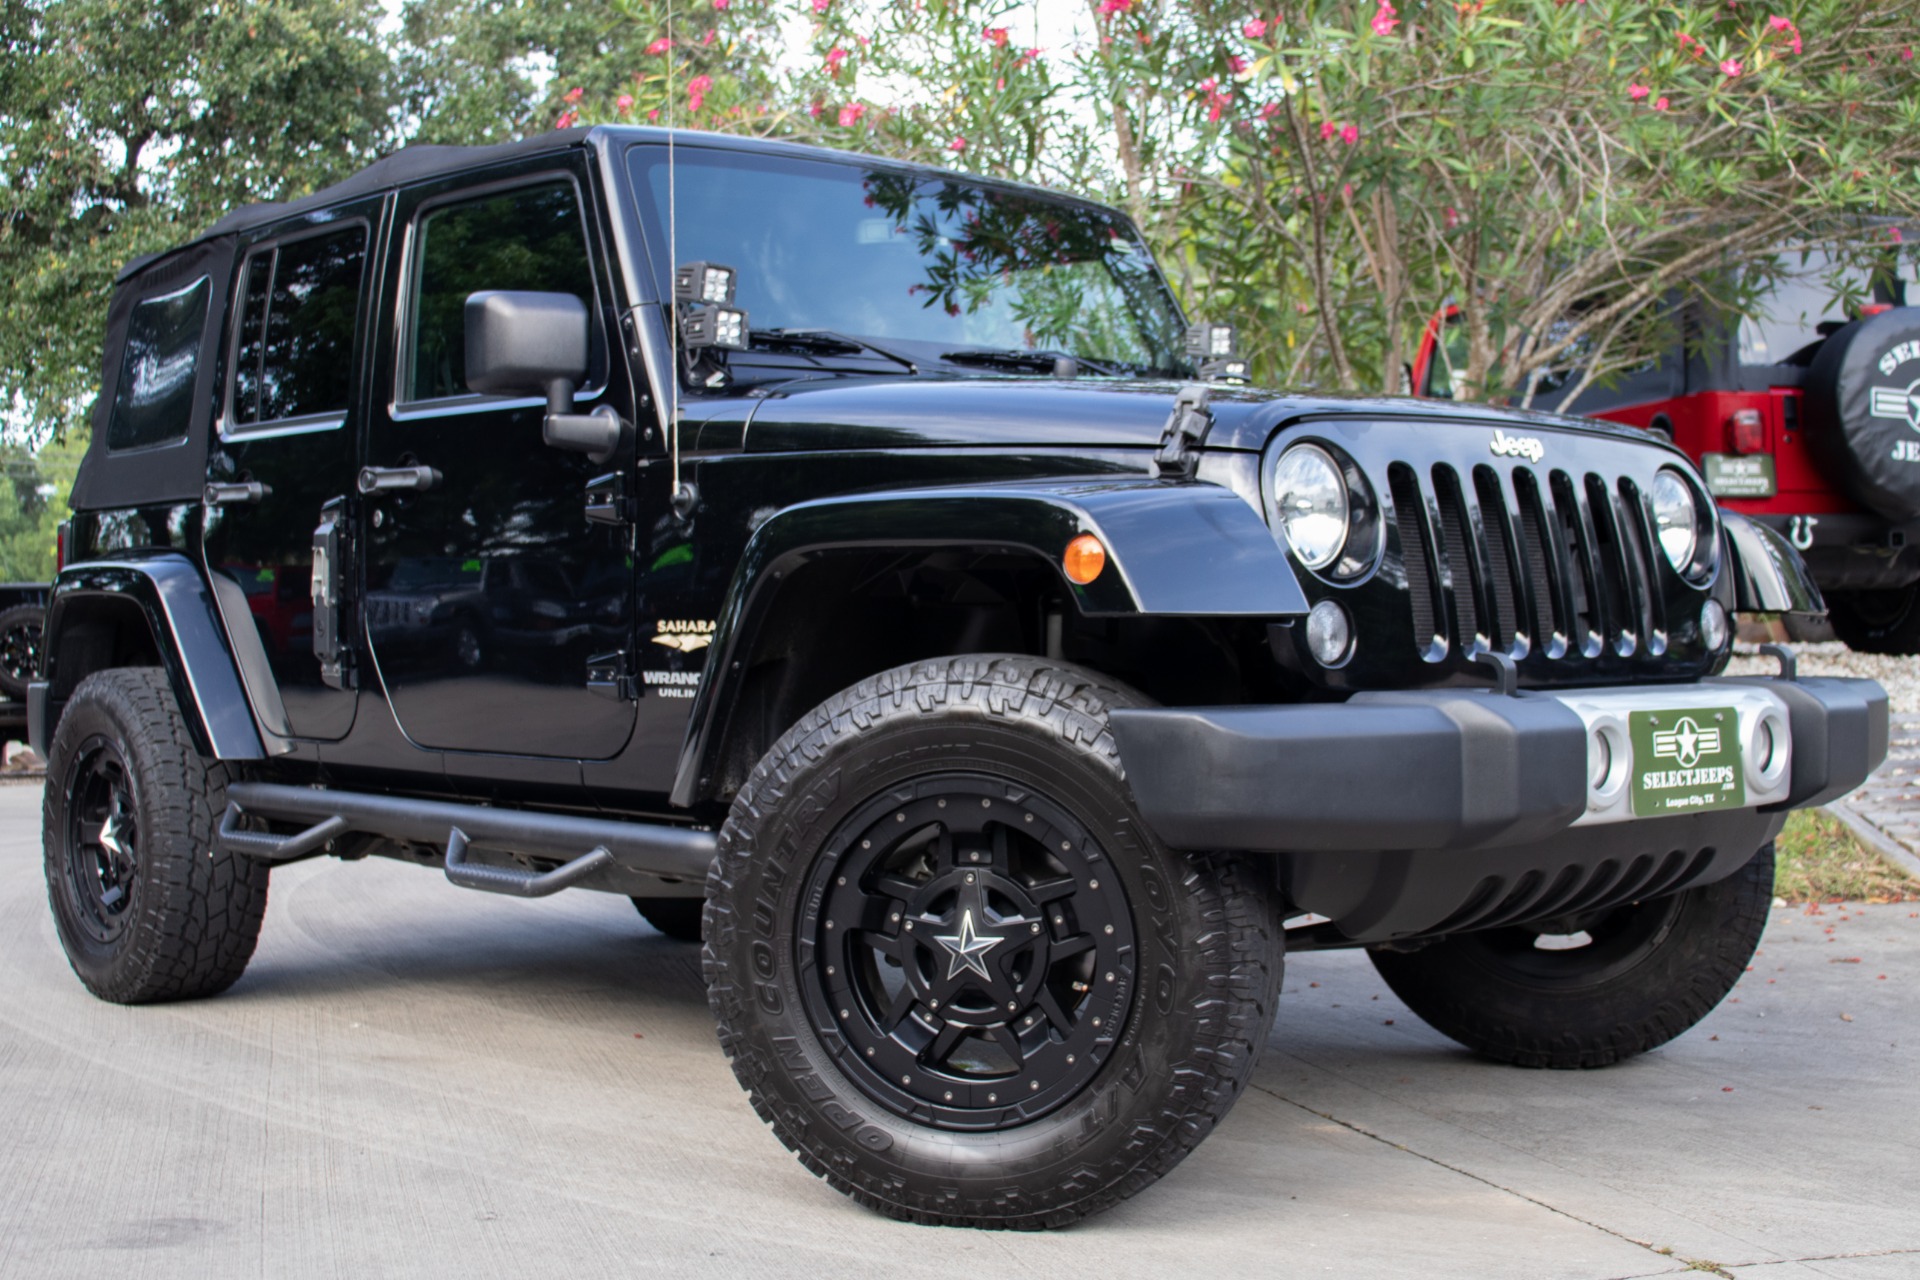 Used 2014 Jeep Wrangler Unlimited Sahara For Sale ($28,995) | Select Jeeps  Inc. Stock #160519